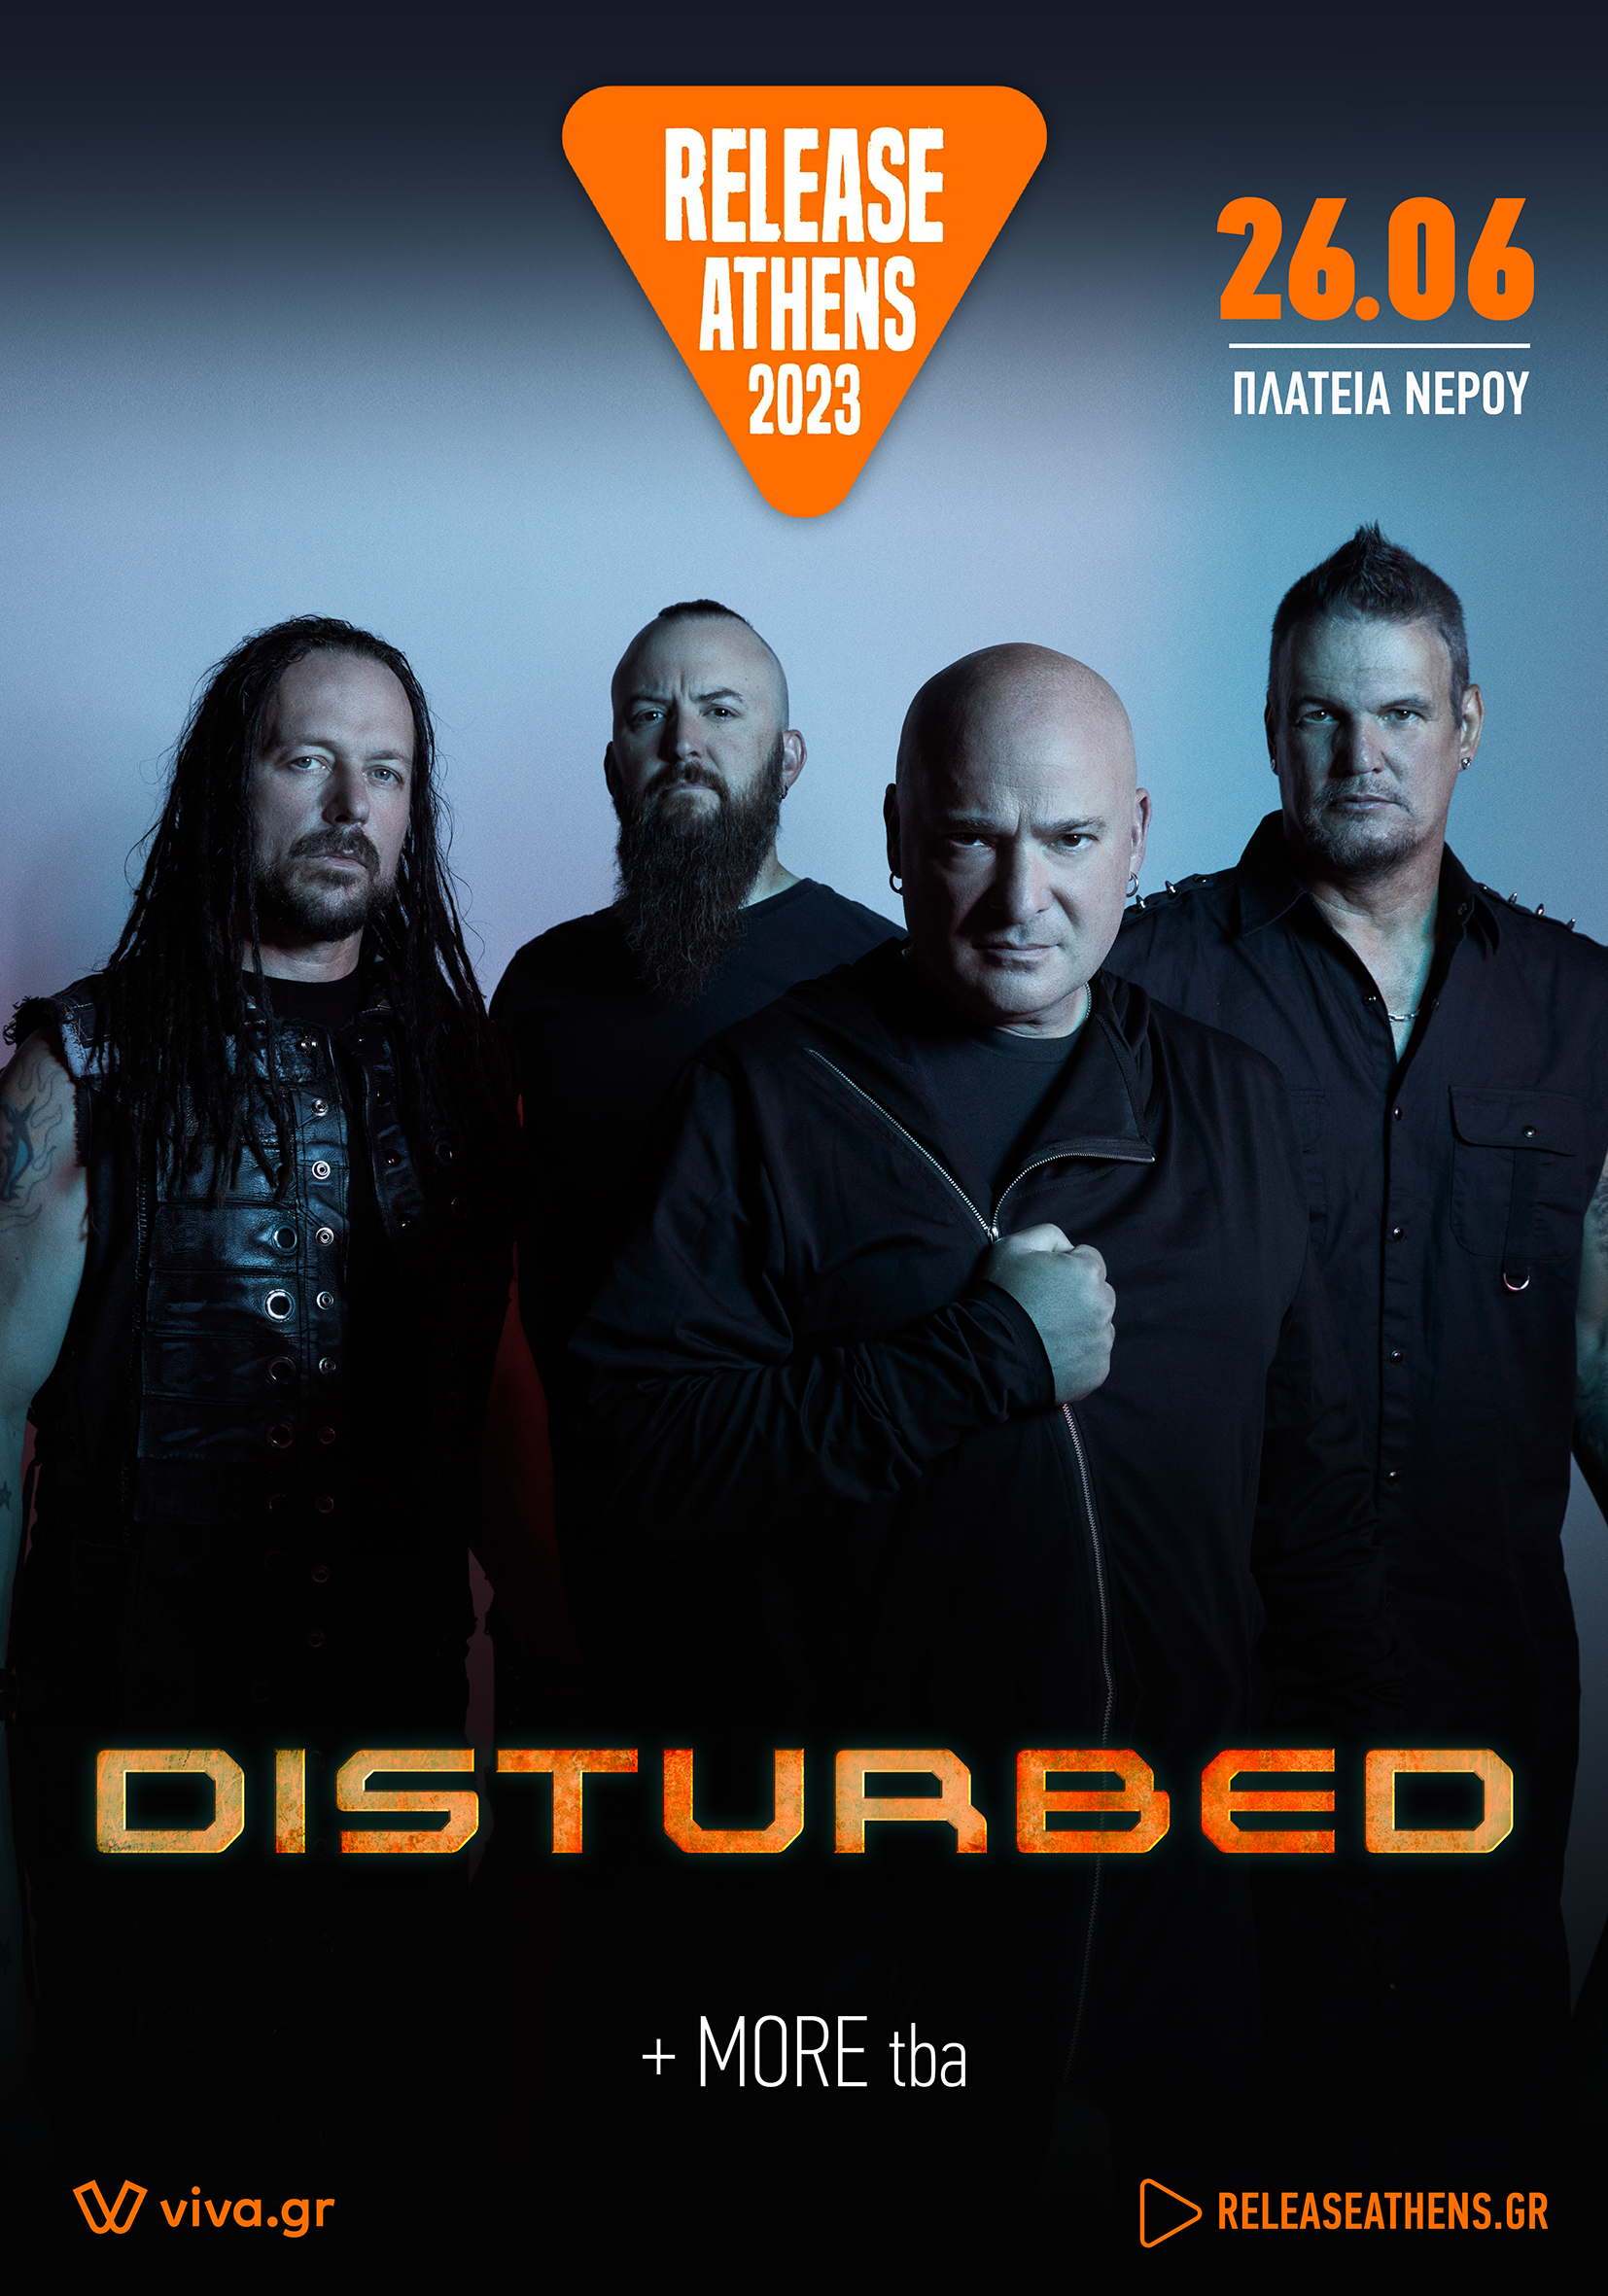 Disturbed at Release Athens Festival on June 26, 2023